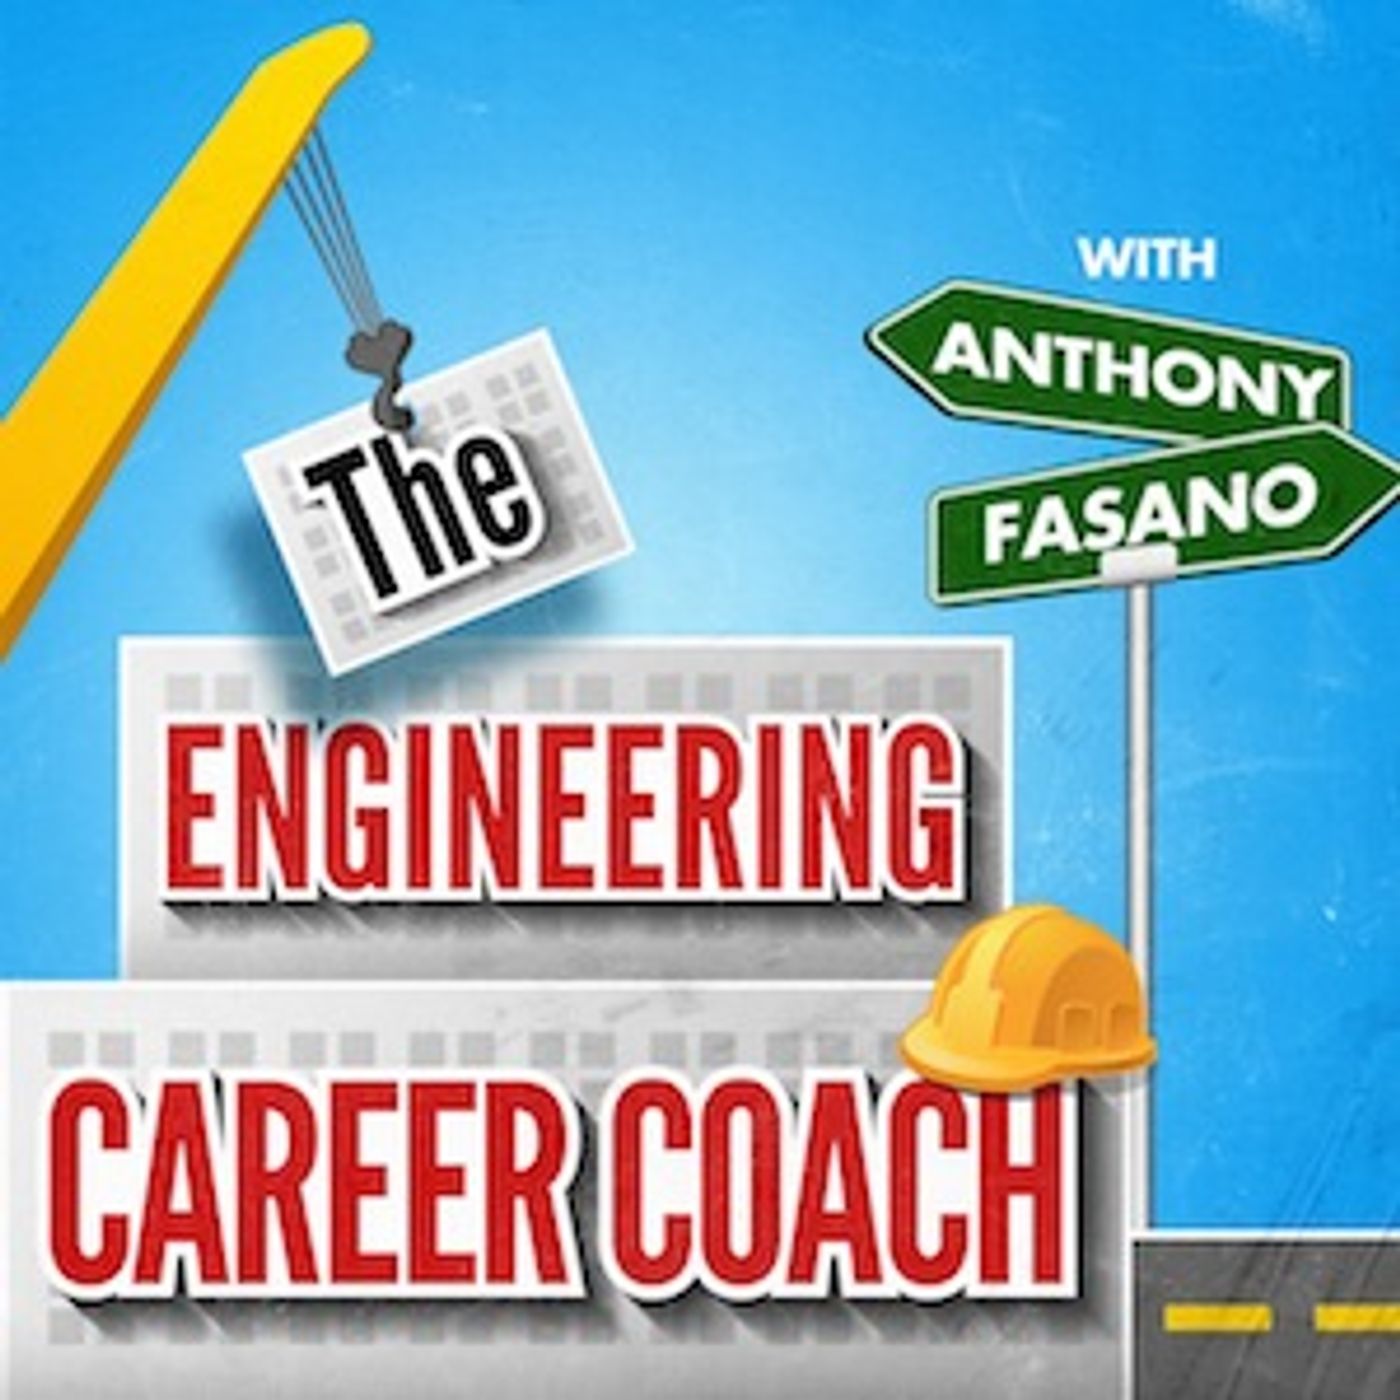 The Engineering Career Coach Podcast